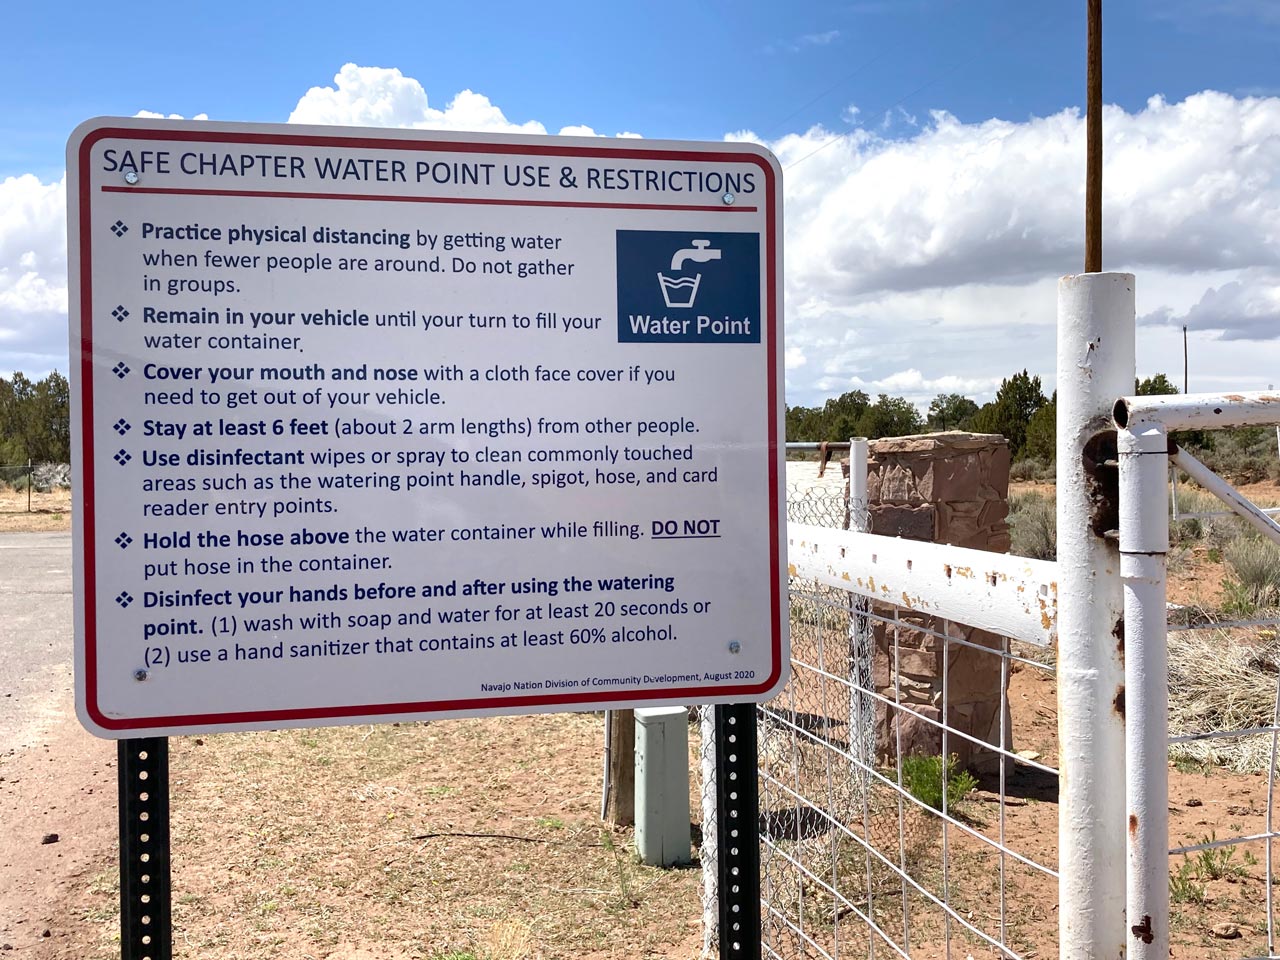 A sign outside the Chi Chil Tah Chapter House explains how to safely fill water containers during the COVID-19 pandemic.